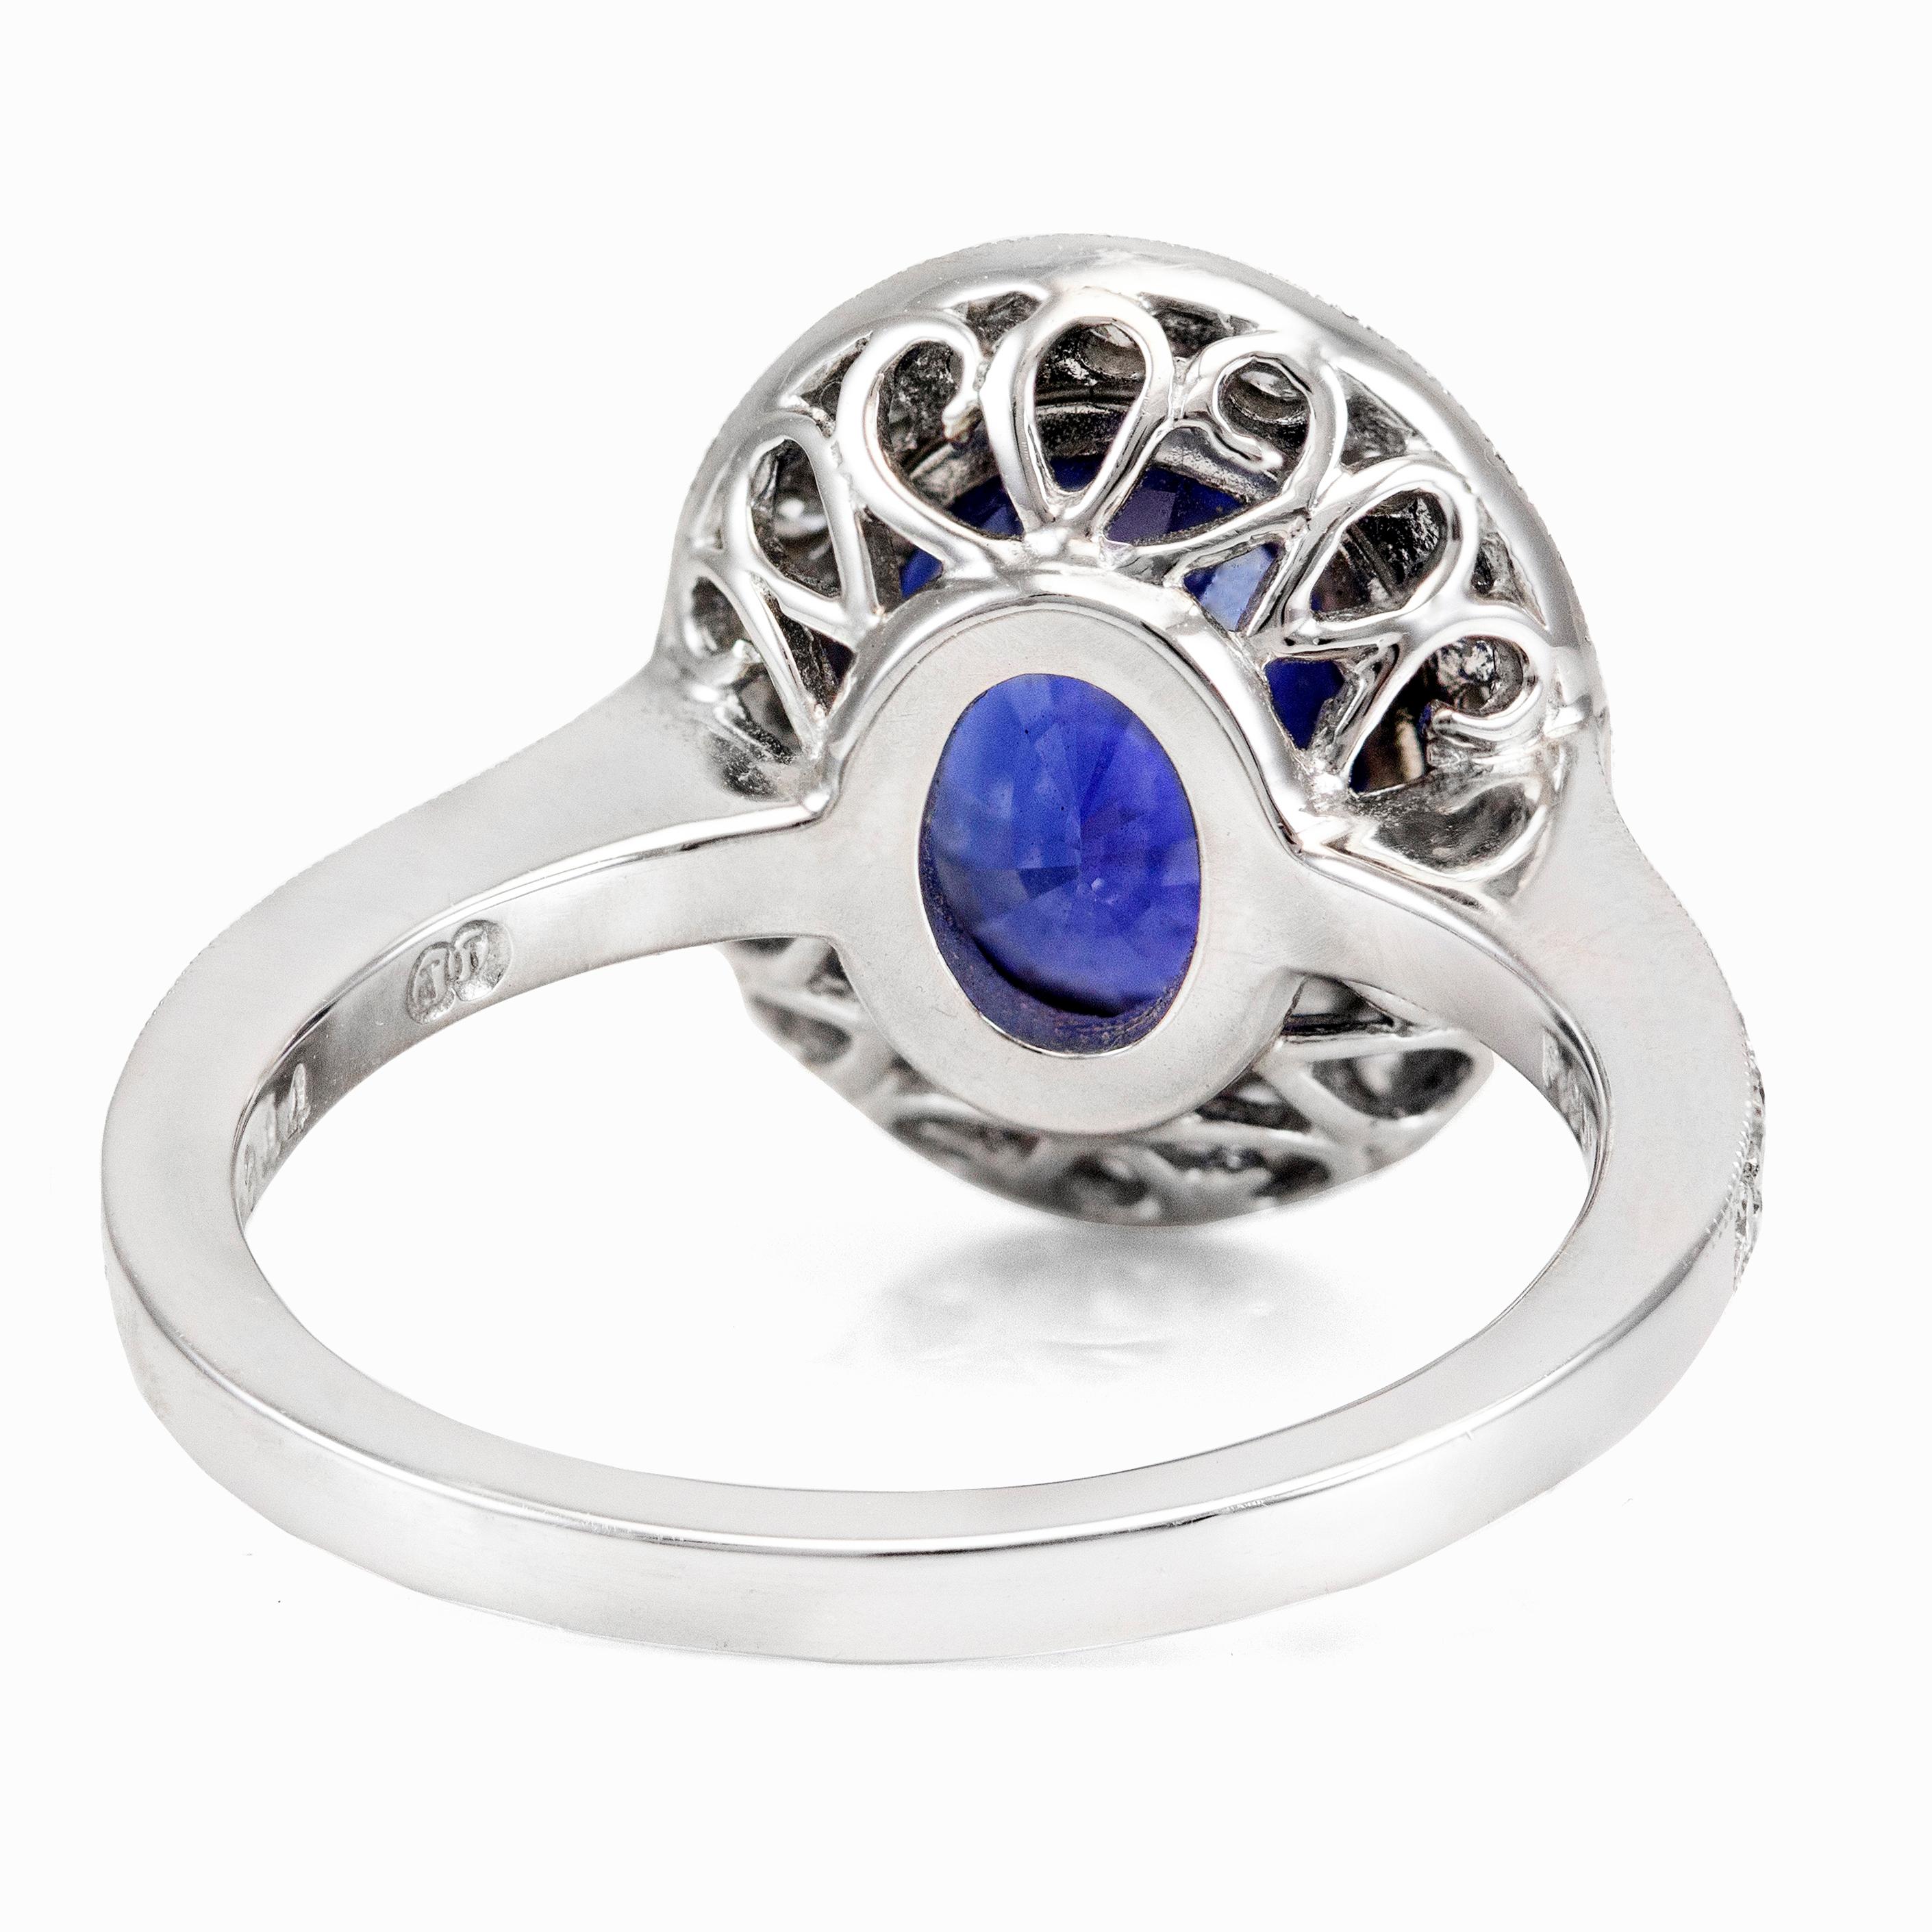 This ring features a 3.60 carats color-rich blue sapphire surrounded by a single row of brilliant round diamonds that continue to the shank of the ring. The diamonds weigh 0.53 carats total. The sapphire has a rich blue color and is eye clean. Set